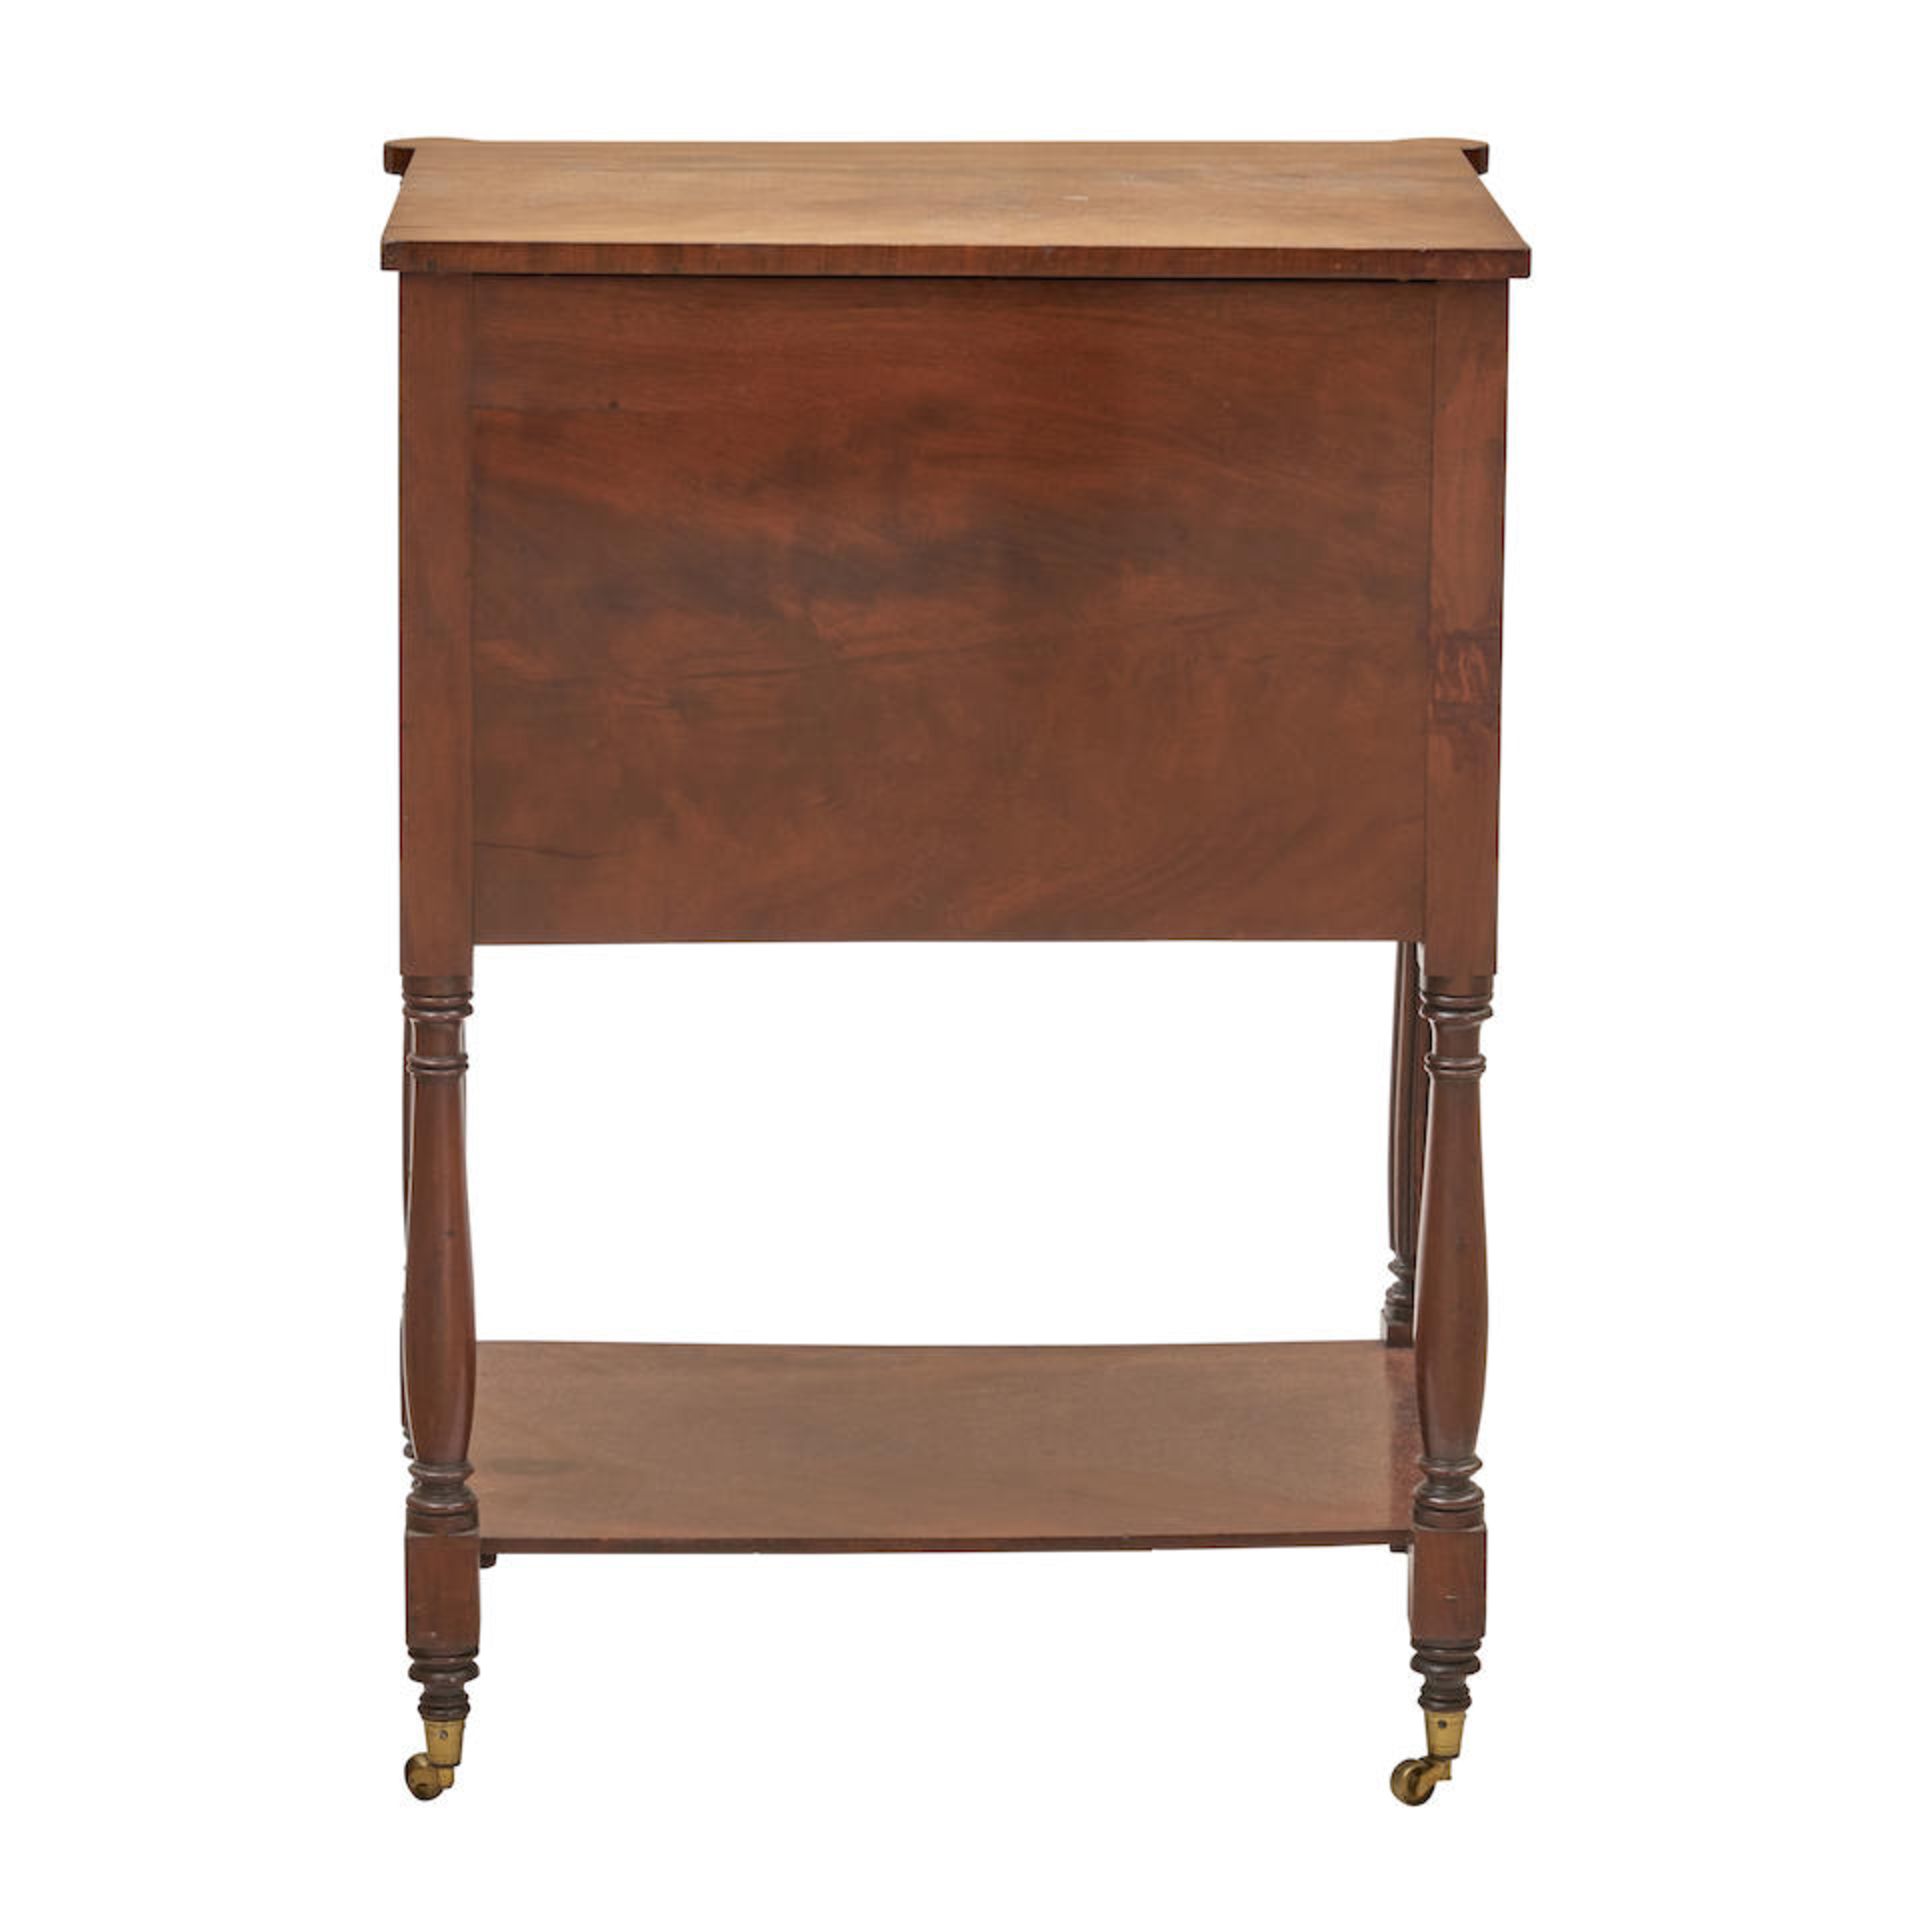 Mahogany and Poplar Writing Table or Chiffonier, probably New York, New York, early 19th century. - Image 3 of 3